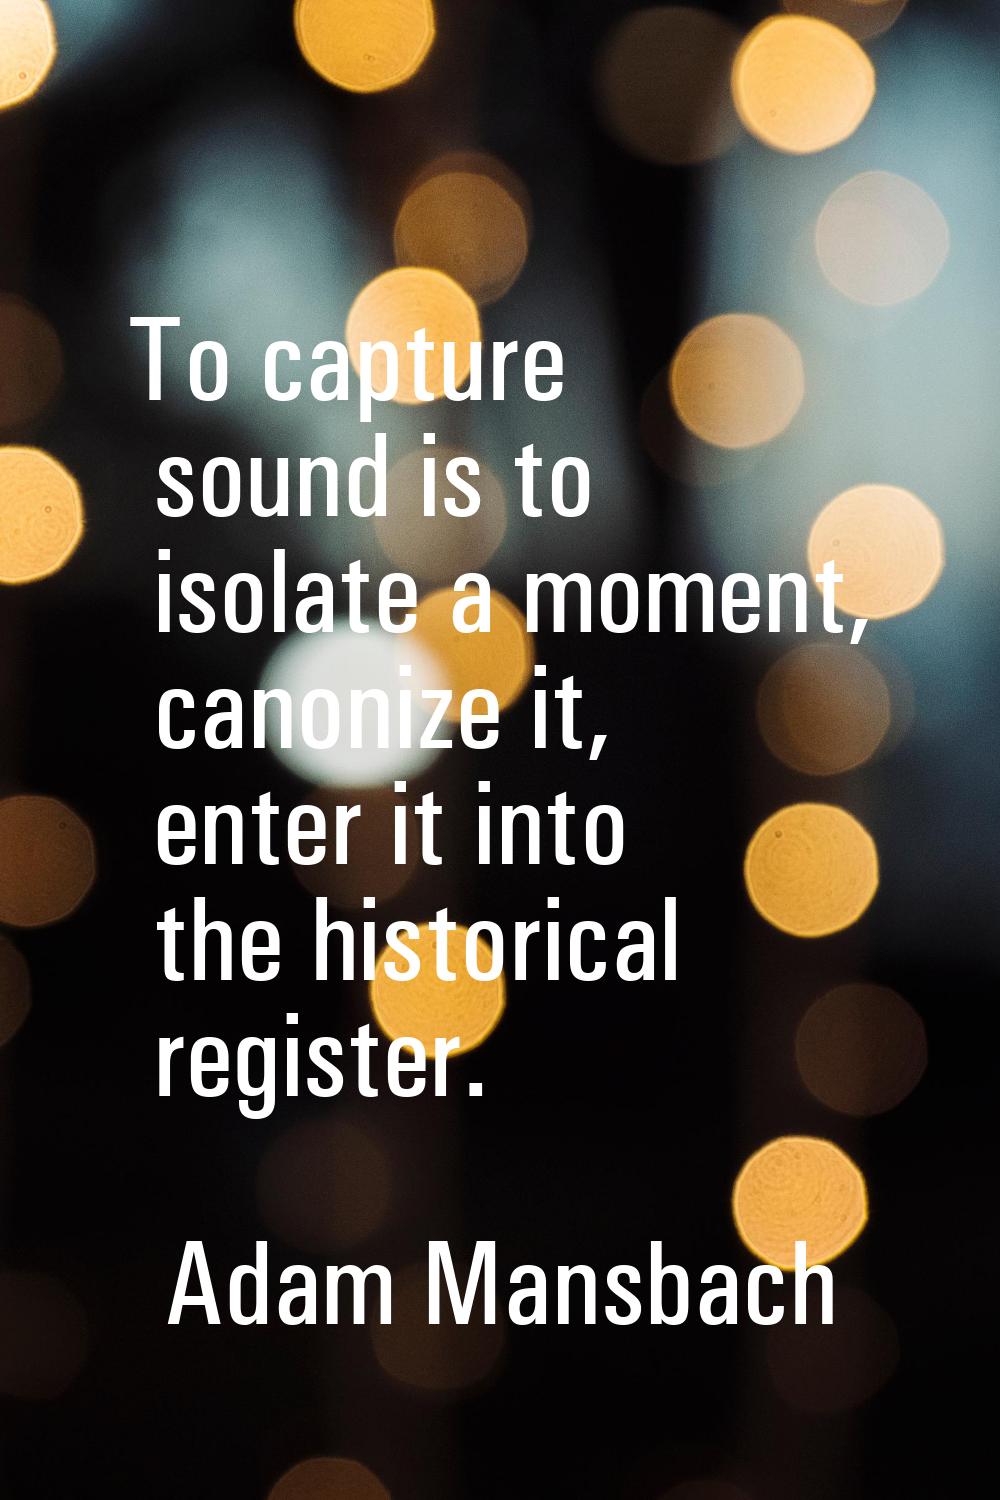 To capture sound is to isolate a moment, canonize it, enter it into the historical register.